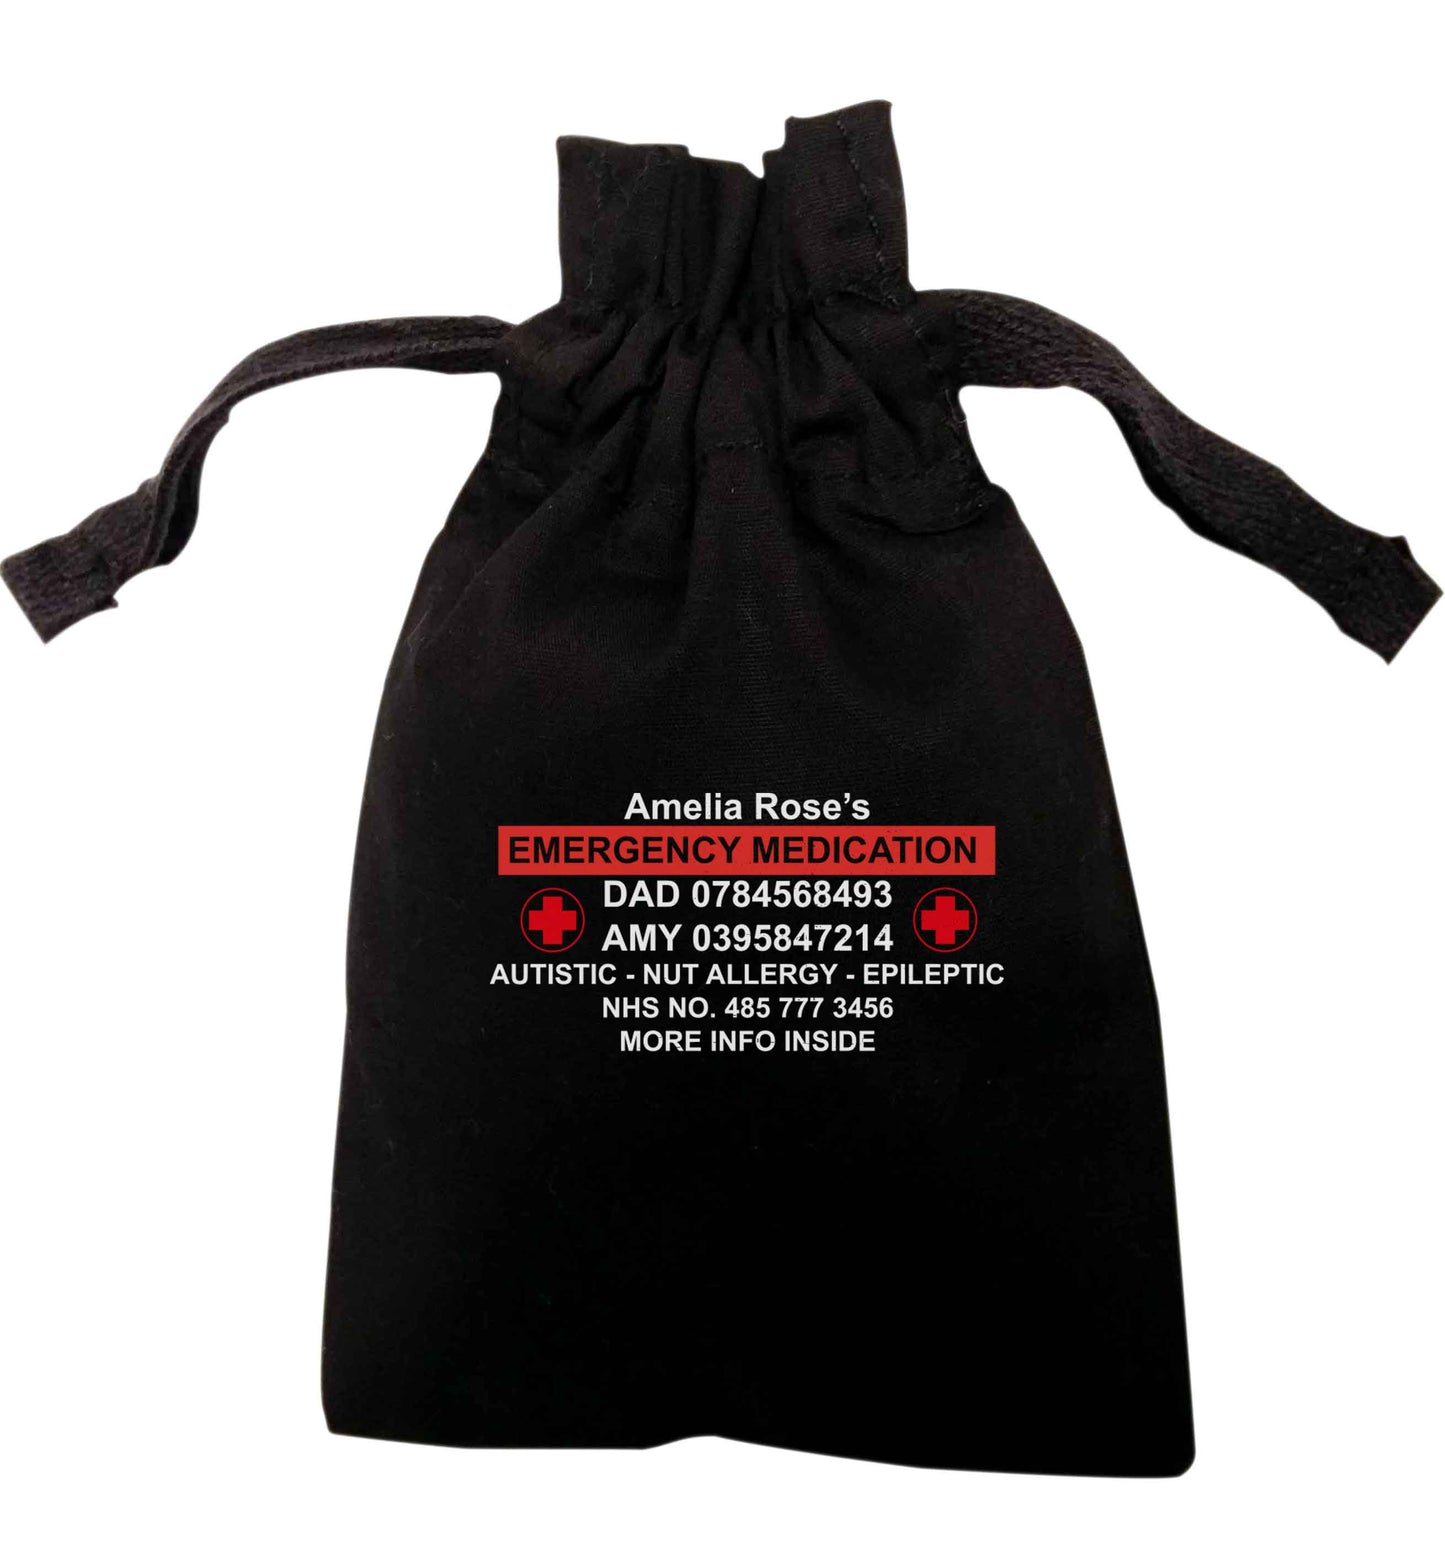 Fully personalised emergency medication bag | XS - L | Pouch / Drawstring bag / Sack | Organic Cotton | Bulk discounts available!